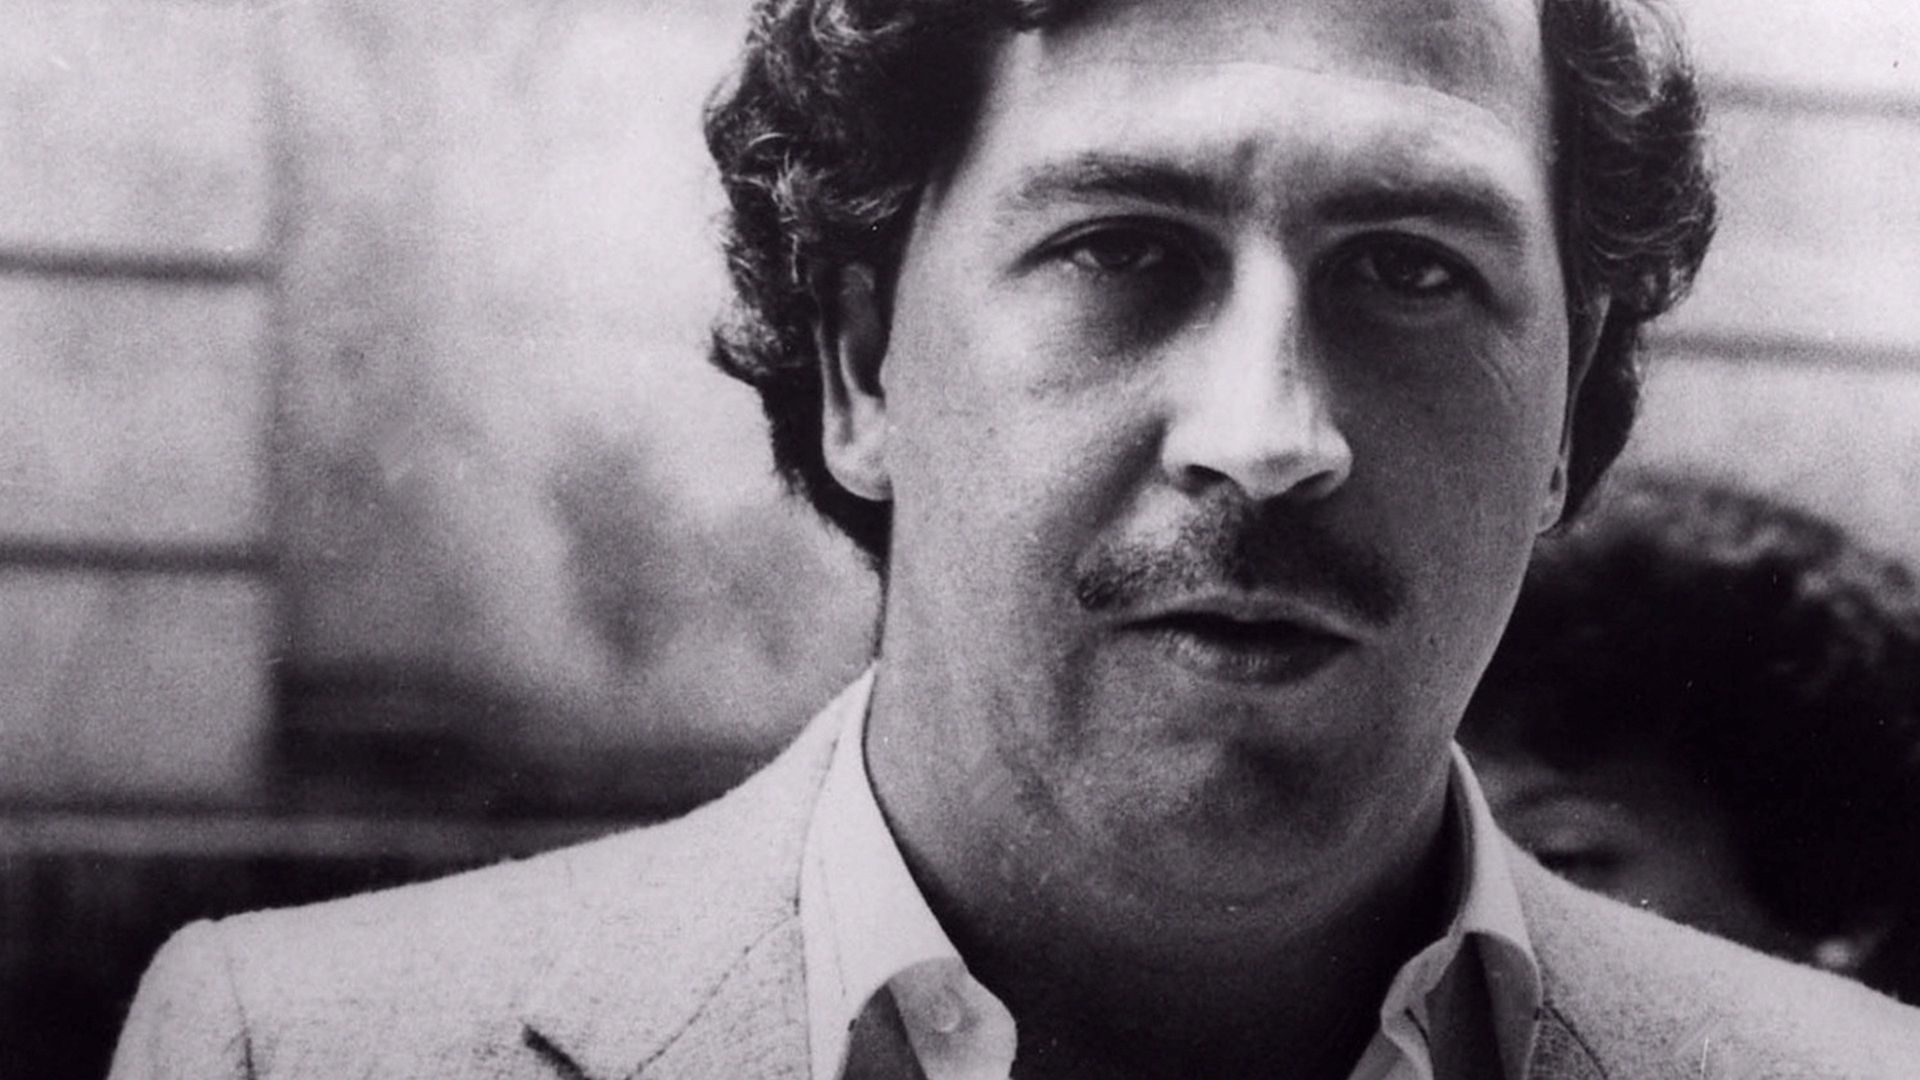 Pablo Escobar: King of Cocaine background